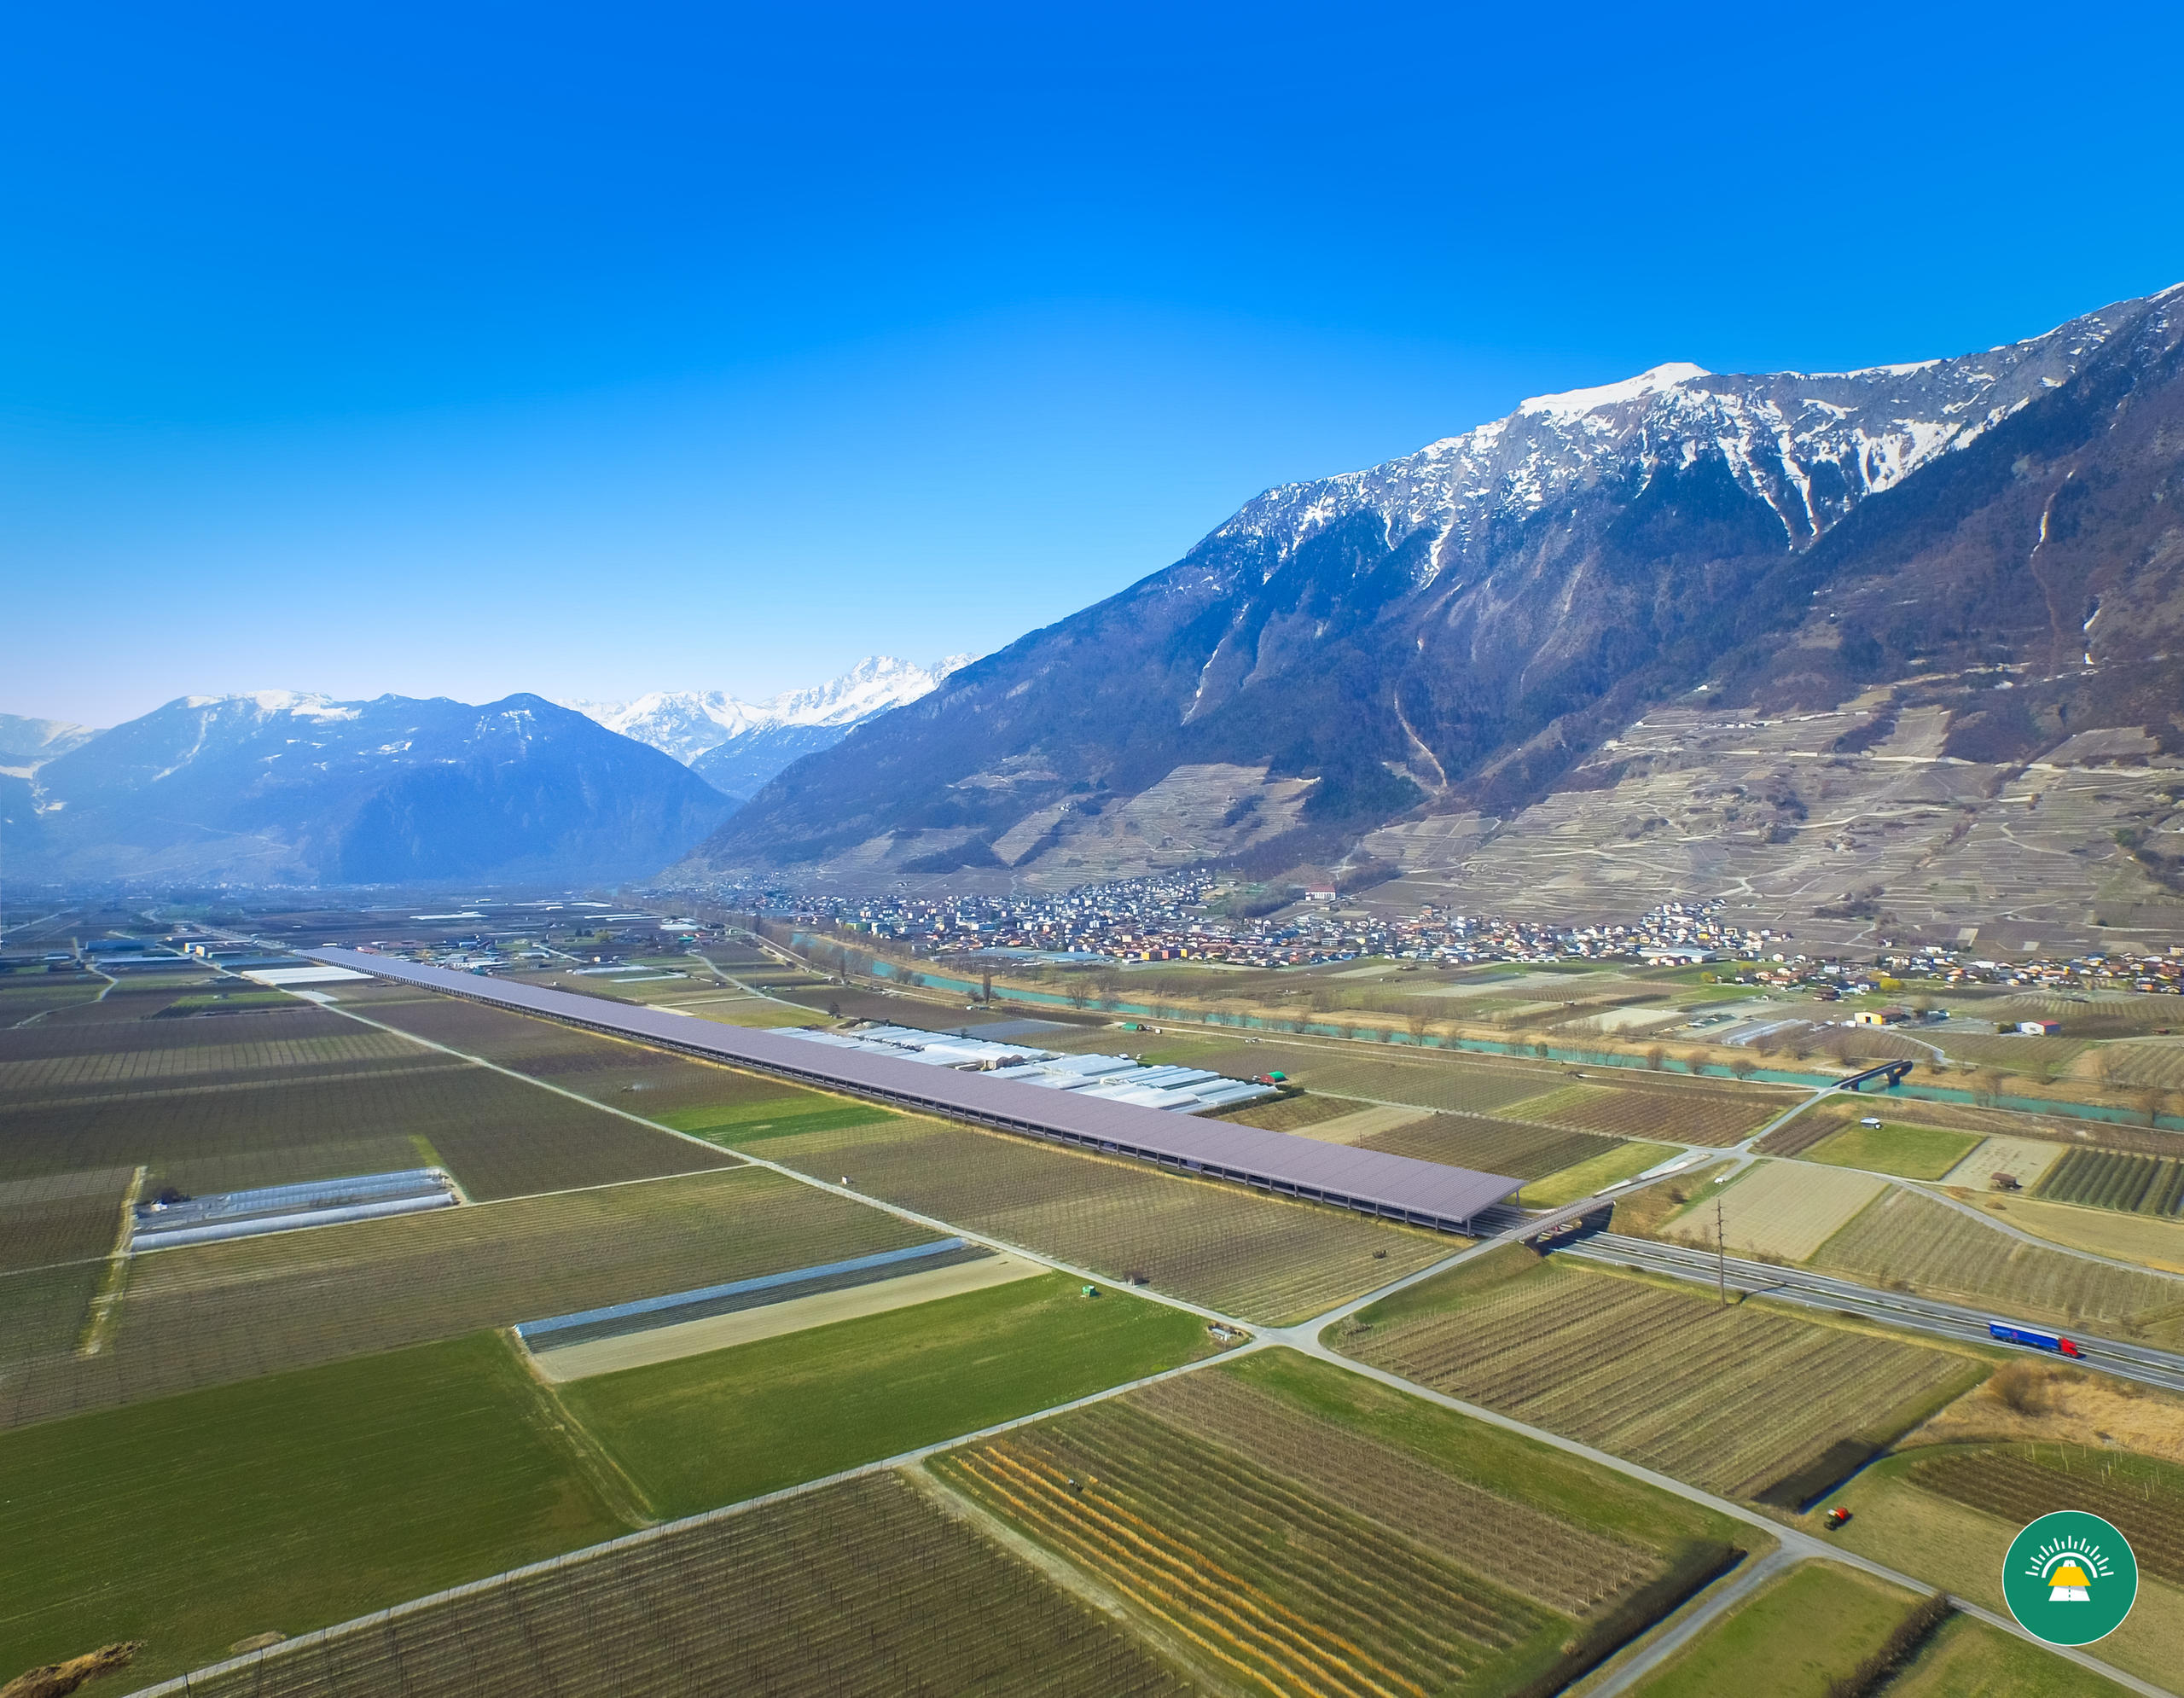 An artist s impression of the planned solar-panelled motorway pilot project near Martigny in southern Switzerland.